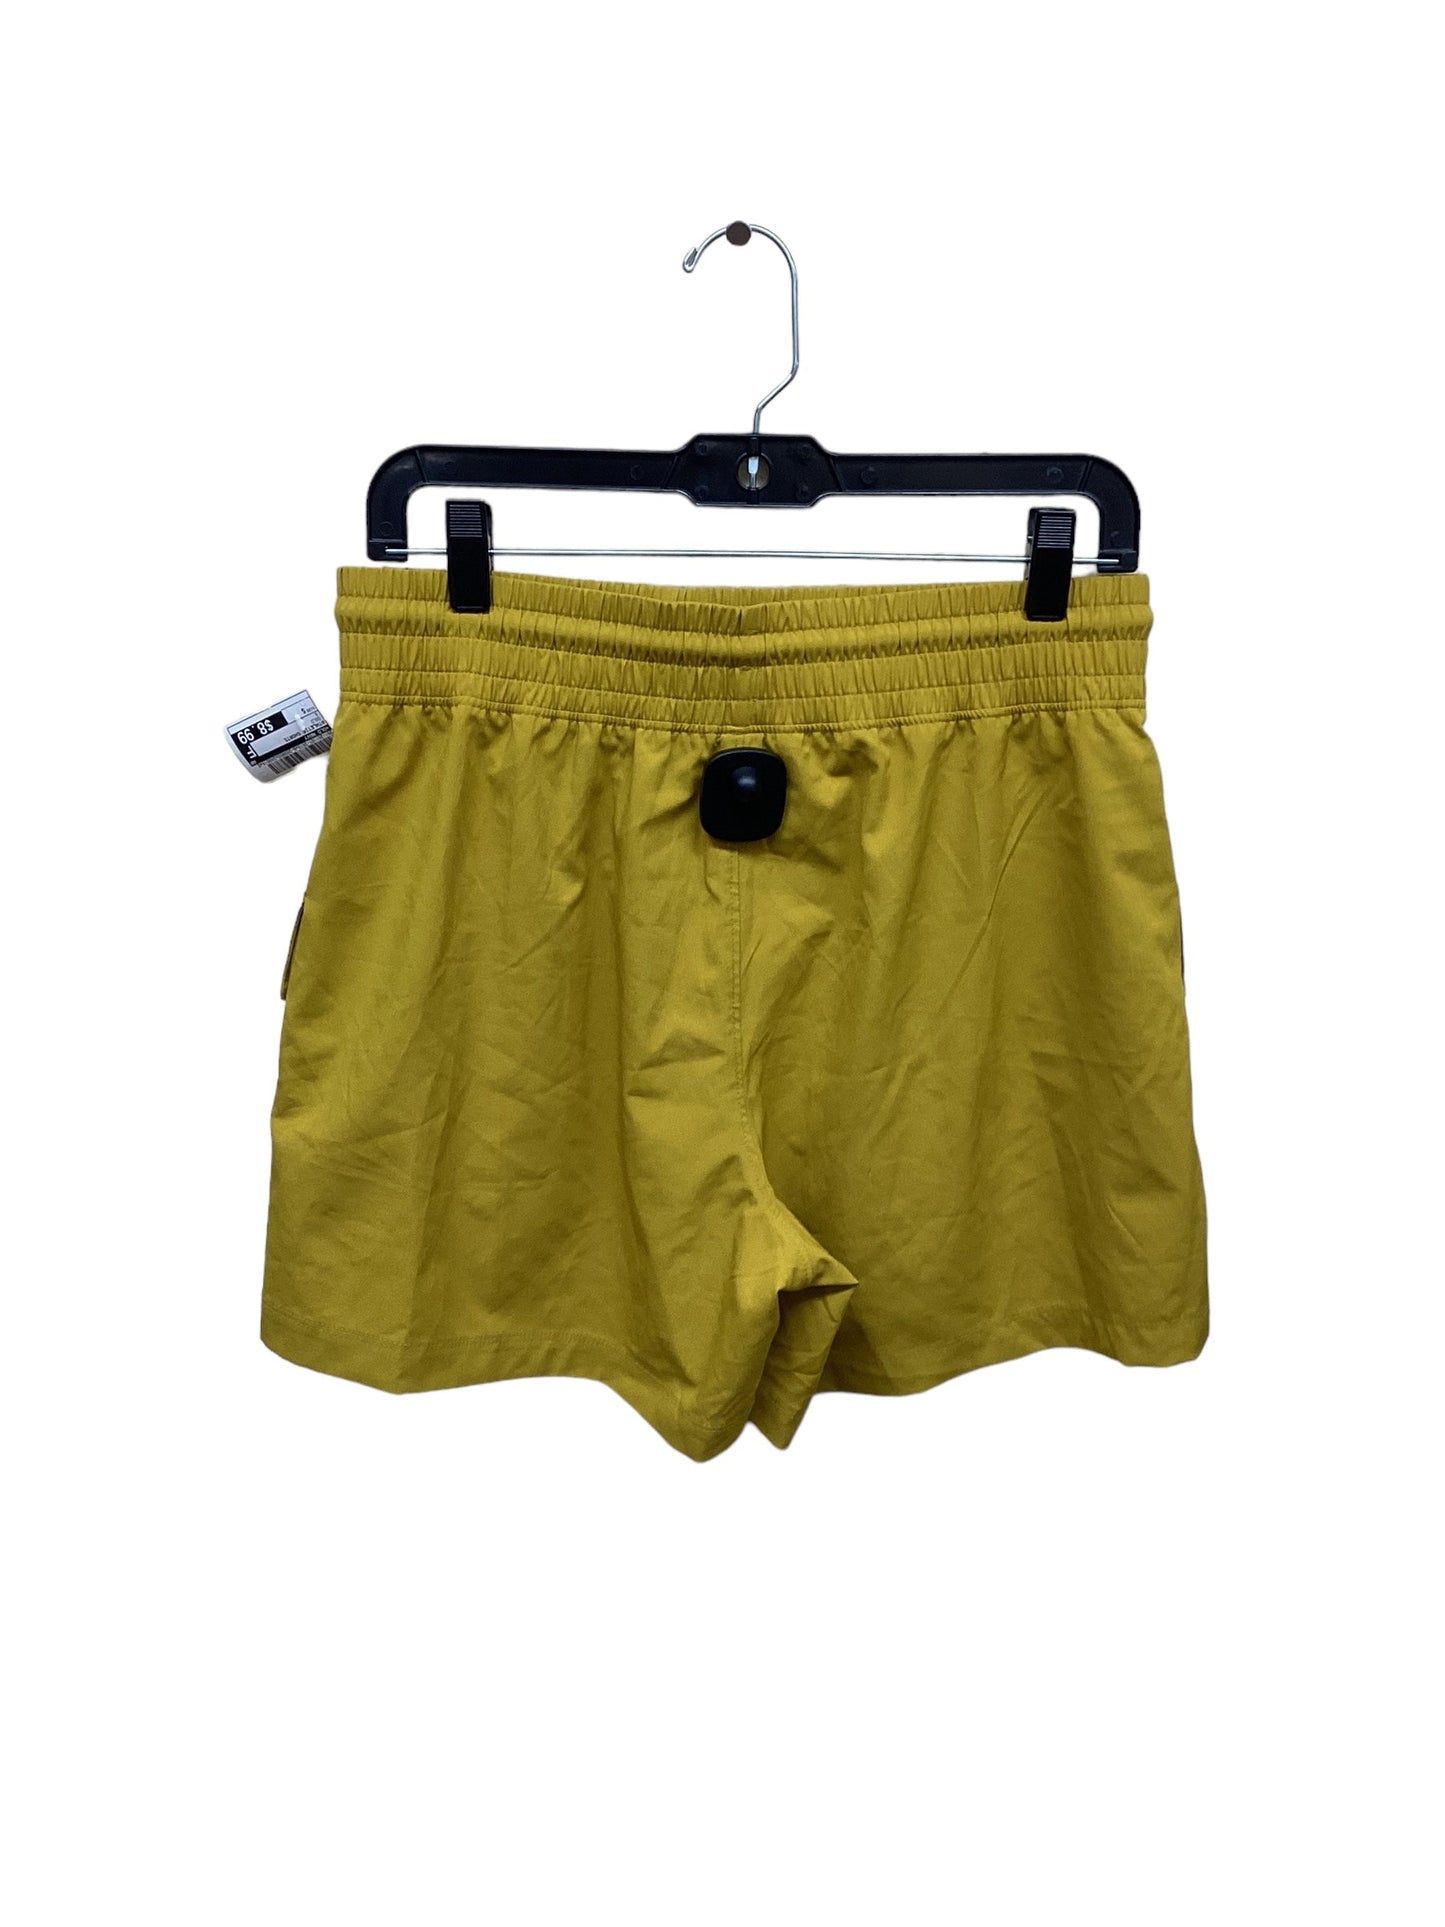 Gold Athletic Shorts Old Navy, Size S